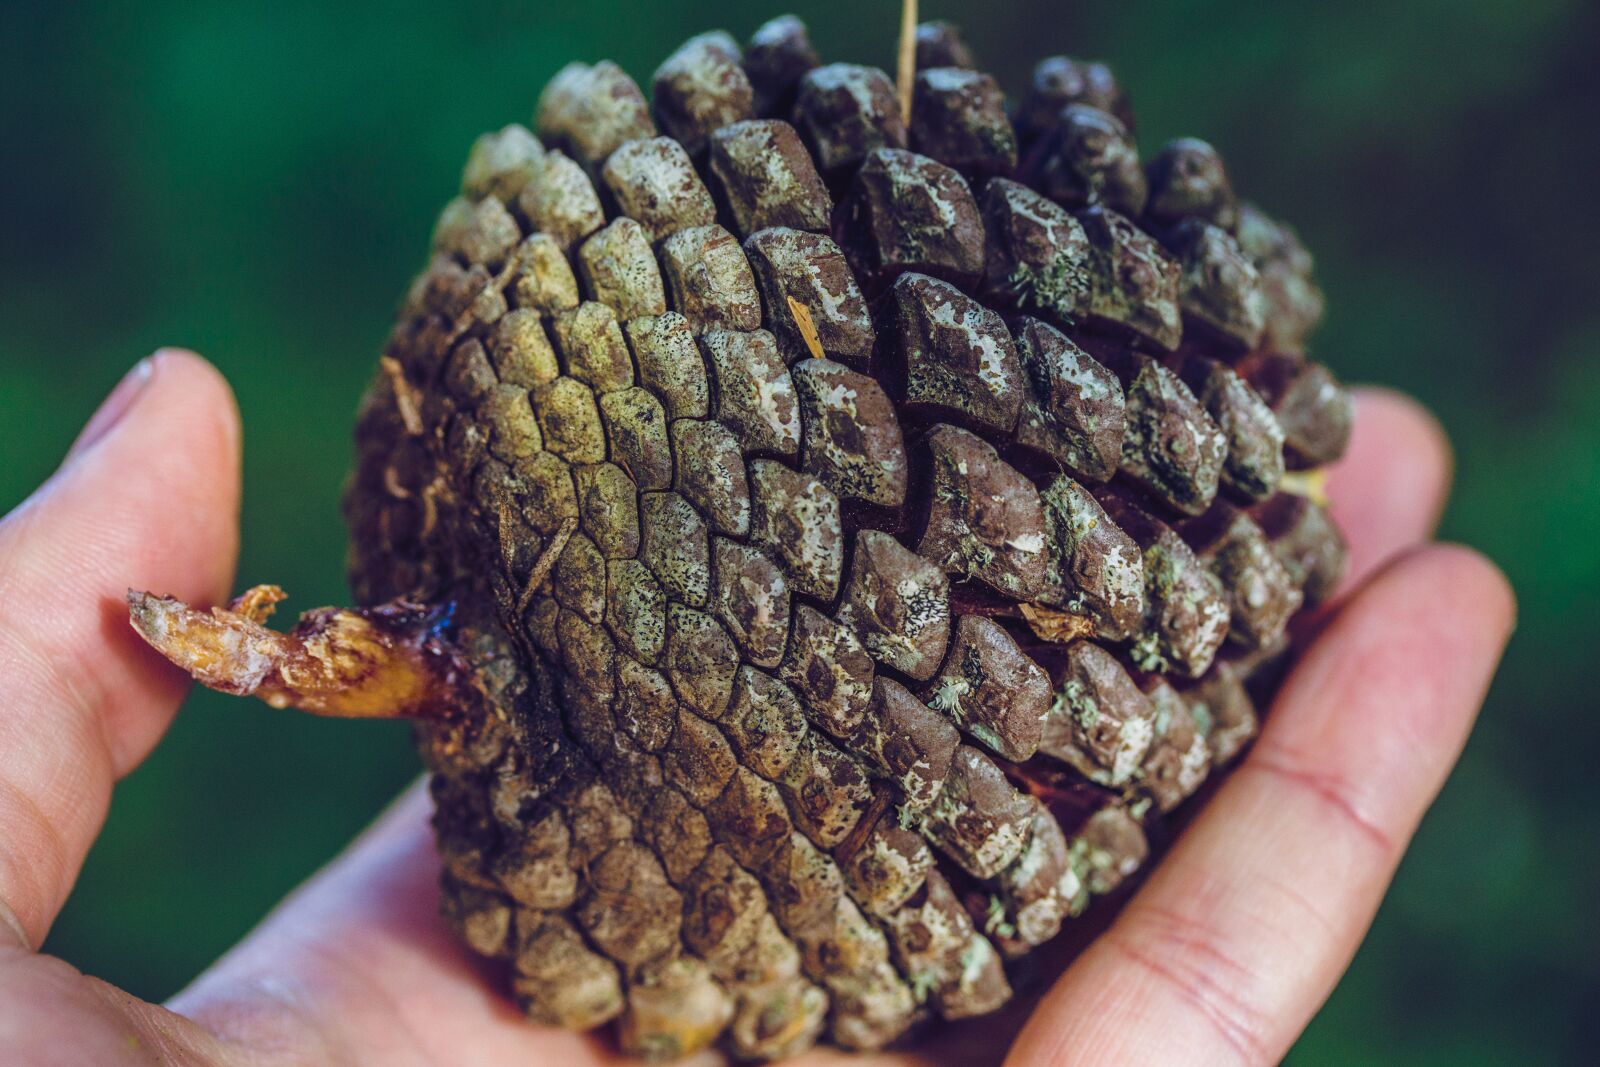 Sony a6000 + Sony DT 50mm F1.8 SAM sample photo. Pine cone, tree, hand photography